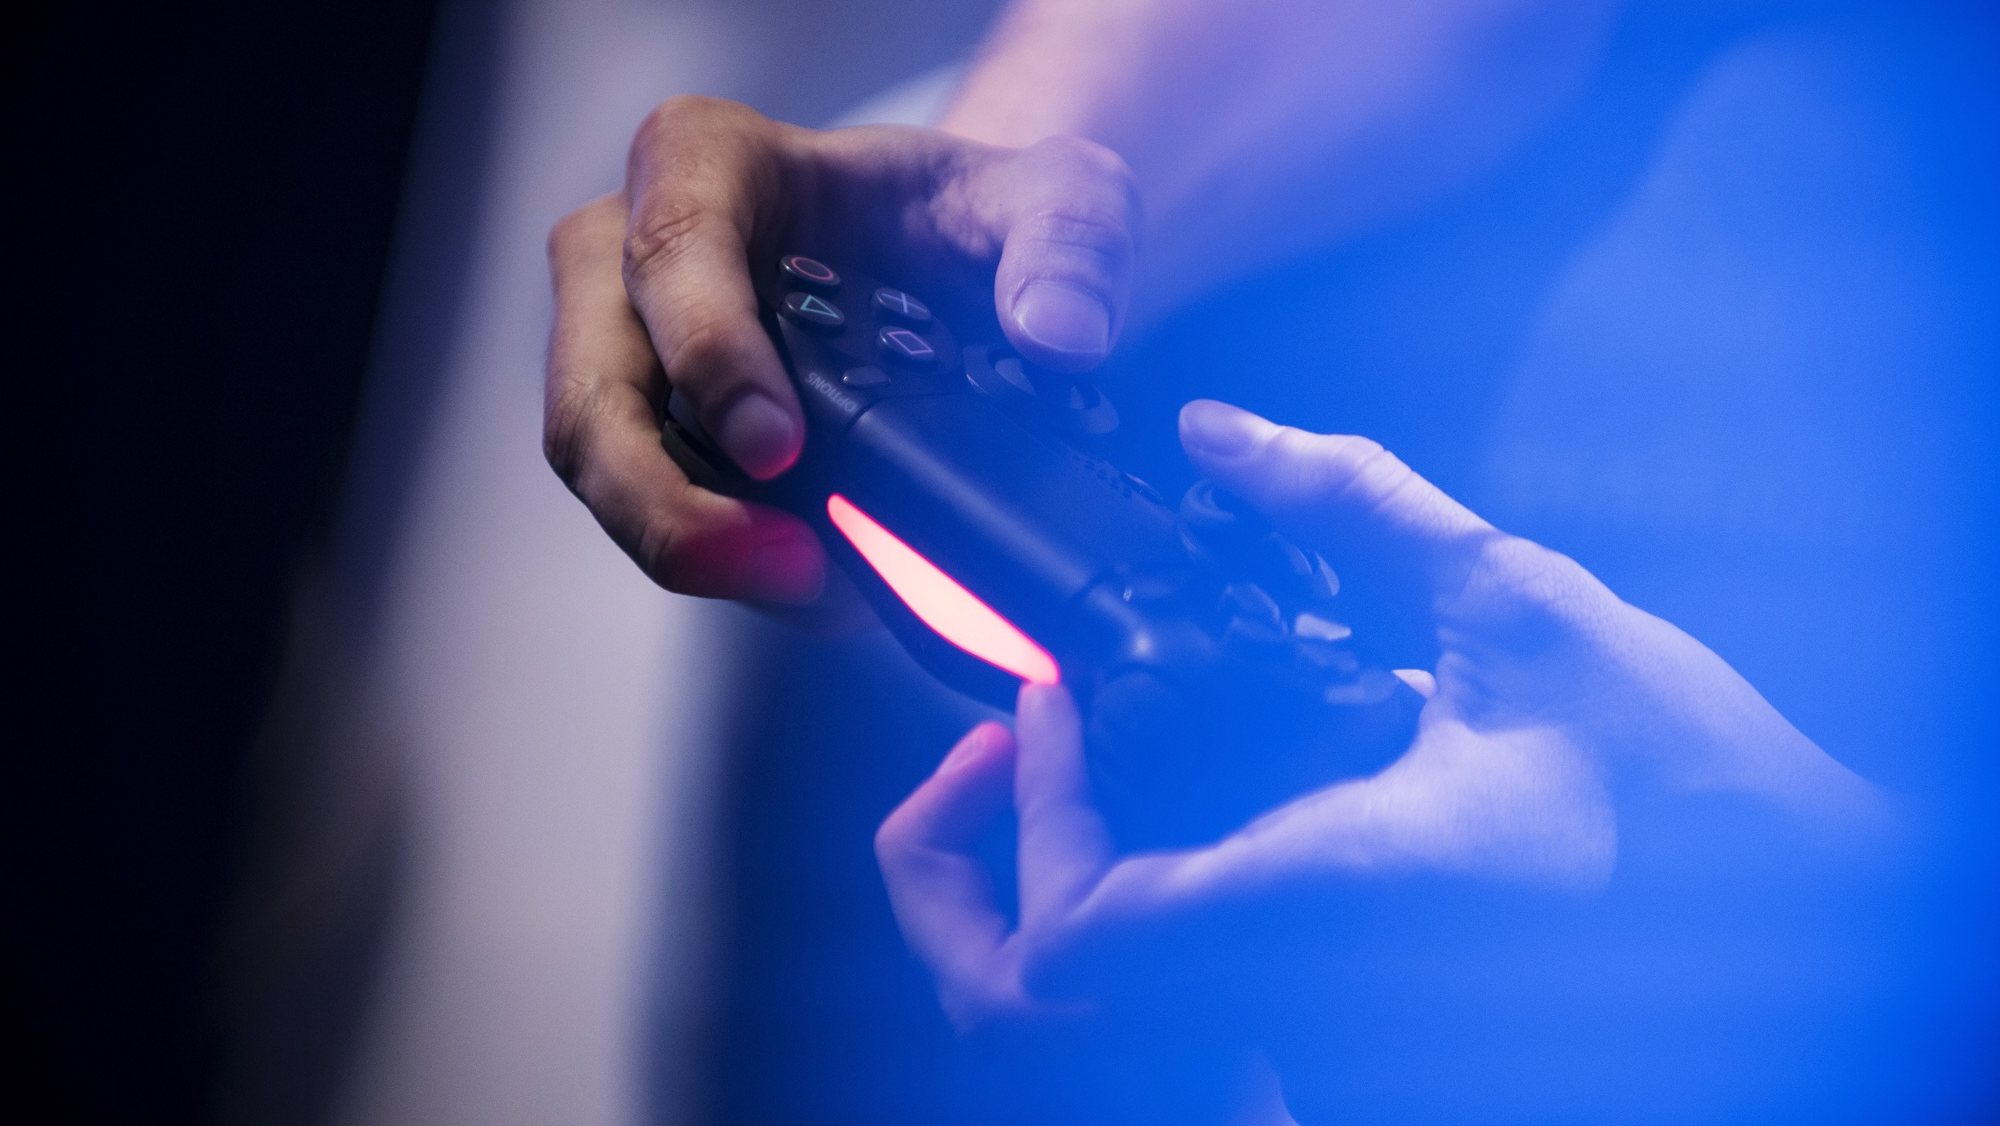 epa06750082 A person holds a game controller during a qualifiers match in the FIFA 18 video game, at the eSports tournament FIFA eClub World Cup 2018 near Paris, France, 19 May 2018. Sixteen professional eSports football teams compete in the qualifiers for entering the EA SPORTS FIFA 18 Global Series Playoffs.  EPA/JULIEN DE ROSA